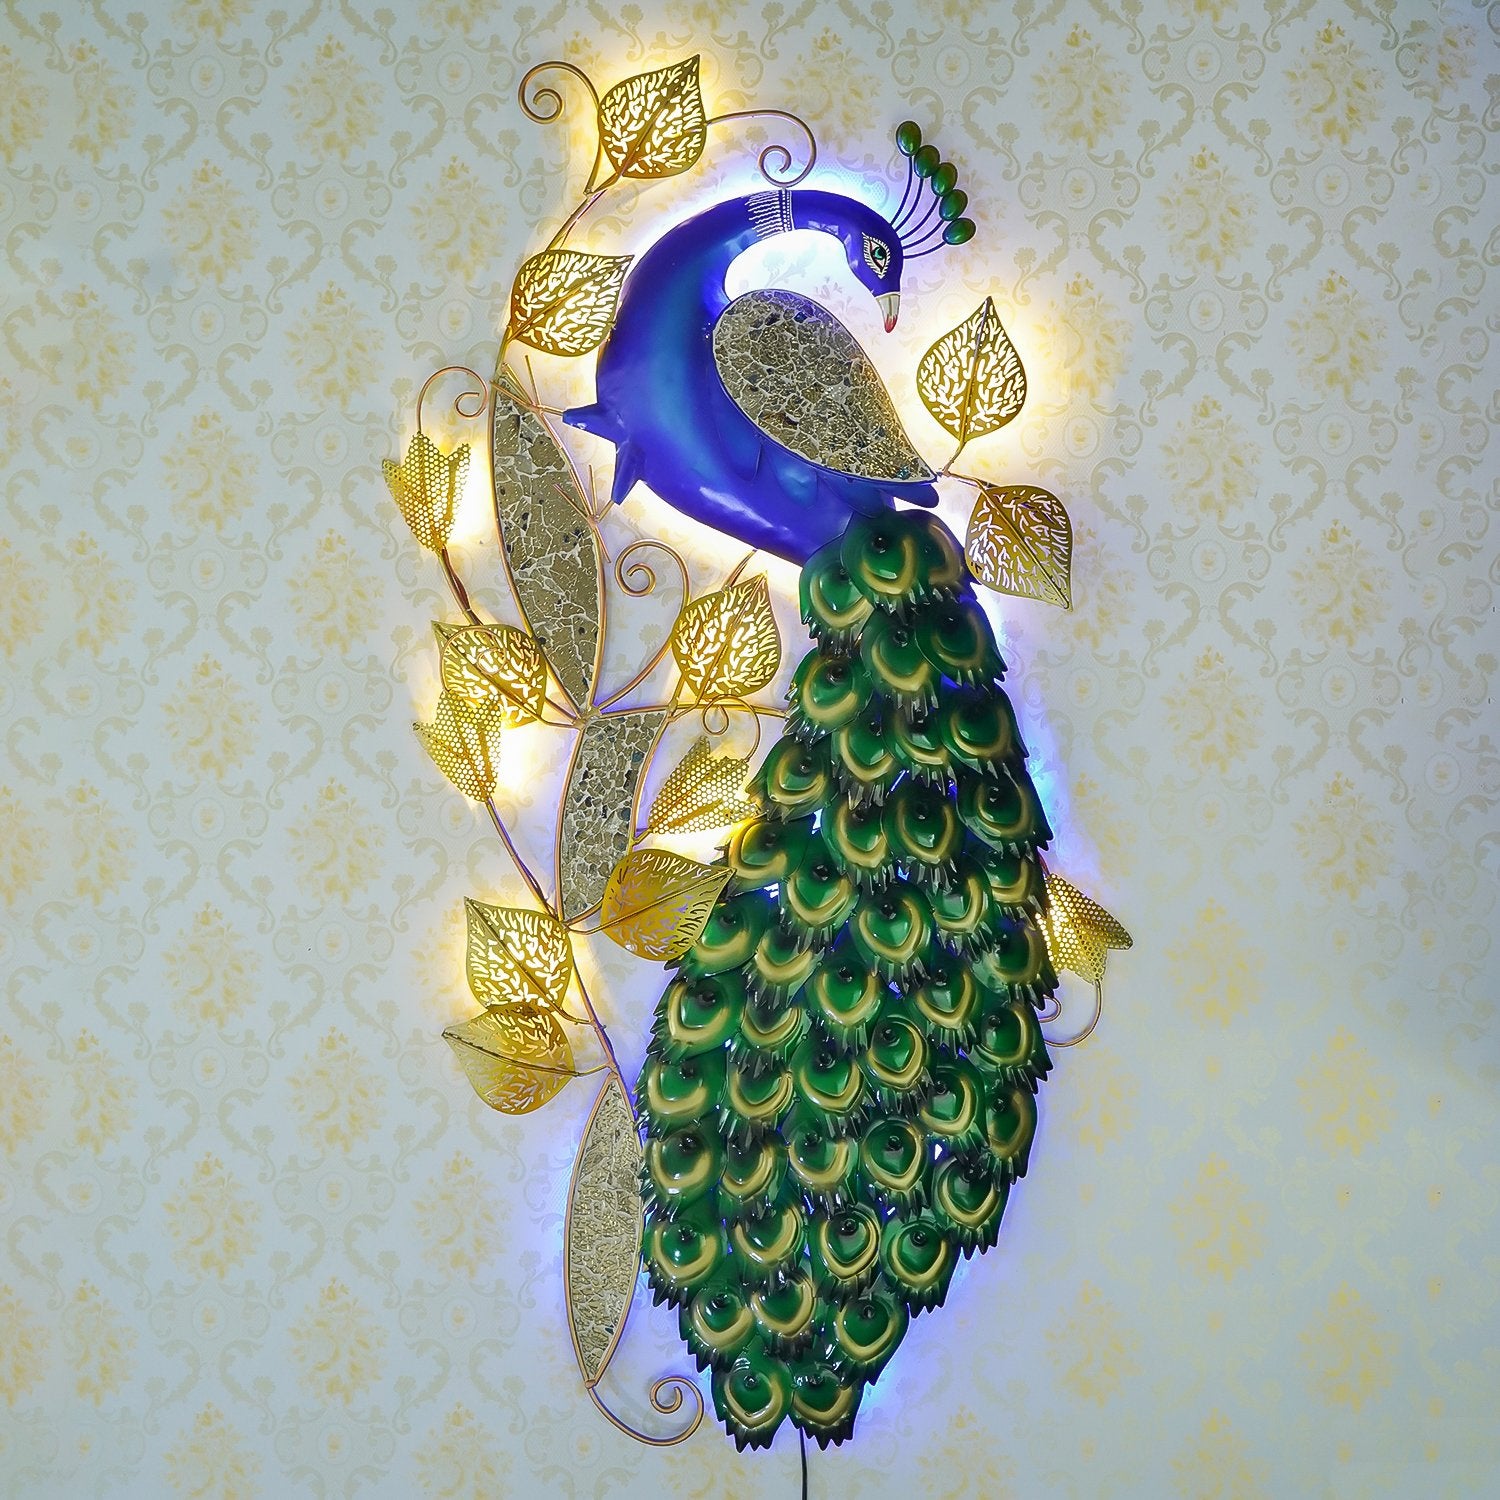 Decorative Colorful Peacock Handcrafted Iron Wall Hanging with background LED's (Blue, Green and Golden)